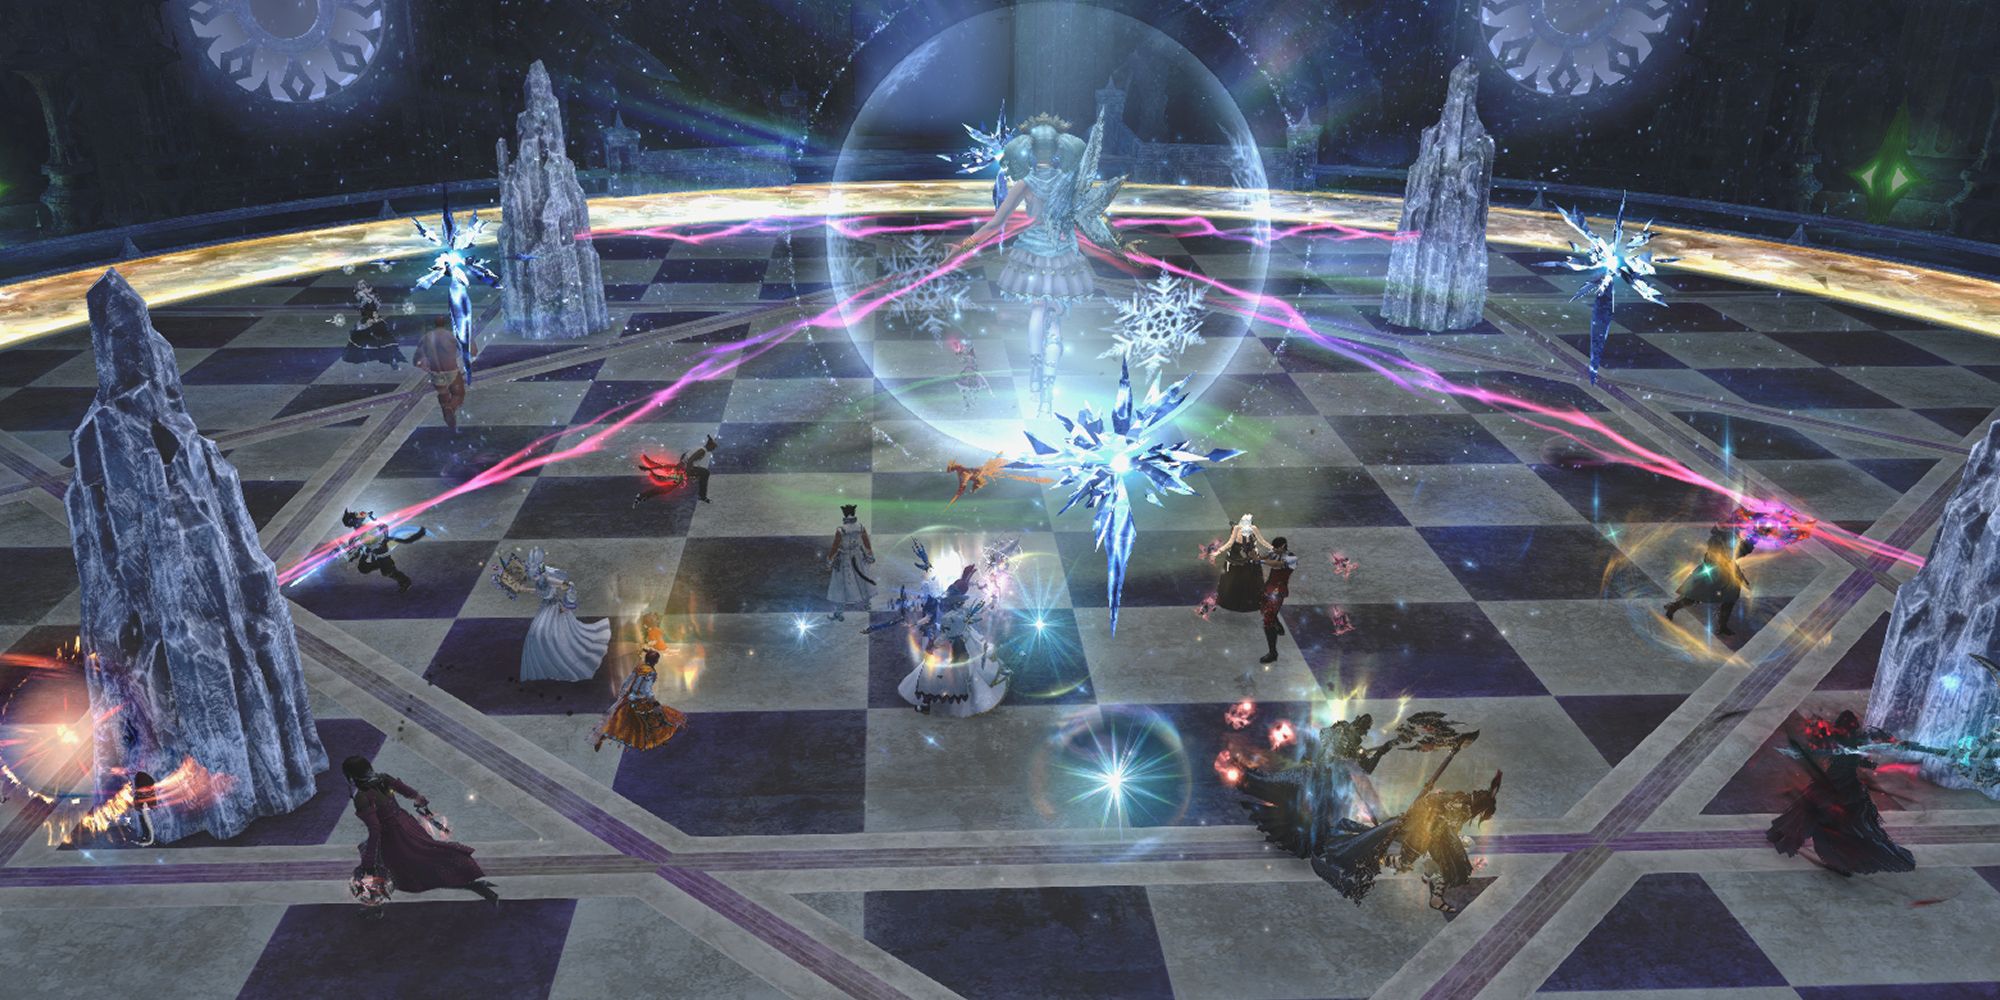 An image of Menphina from the Final Fantasy 14 raid Euphrosyne, using Selenian Mysteria. Menphina is in the centre of the arena, and she has summoned pillars and sprites to attack the raid. These icy pillars need to be destroyed to break the shield surrounding her.